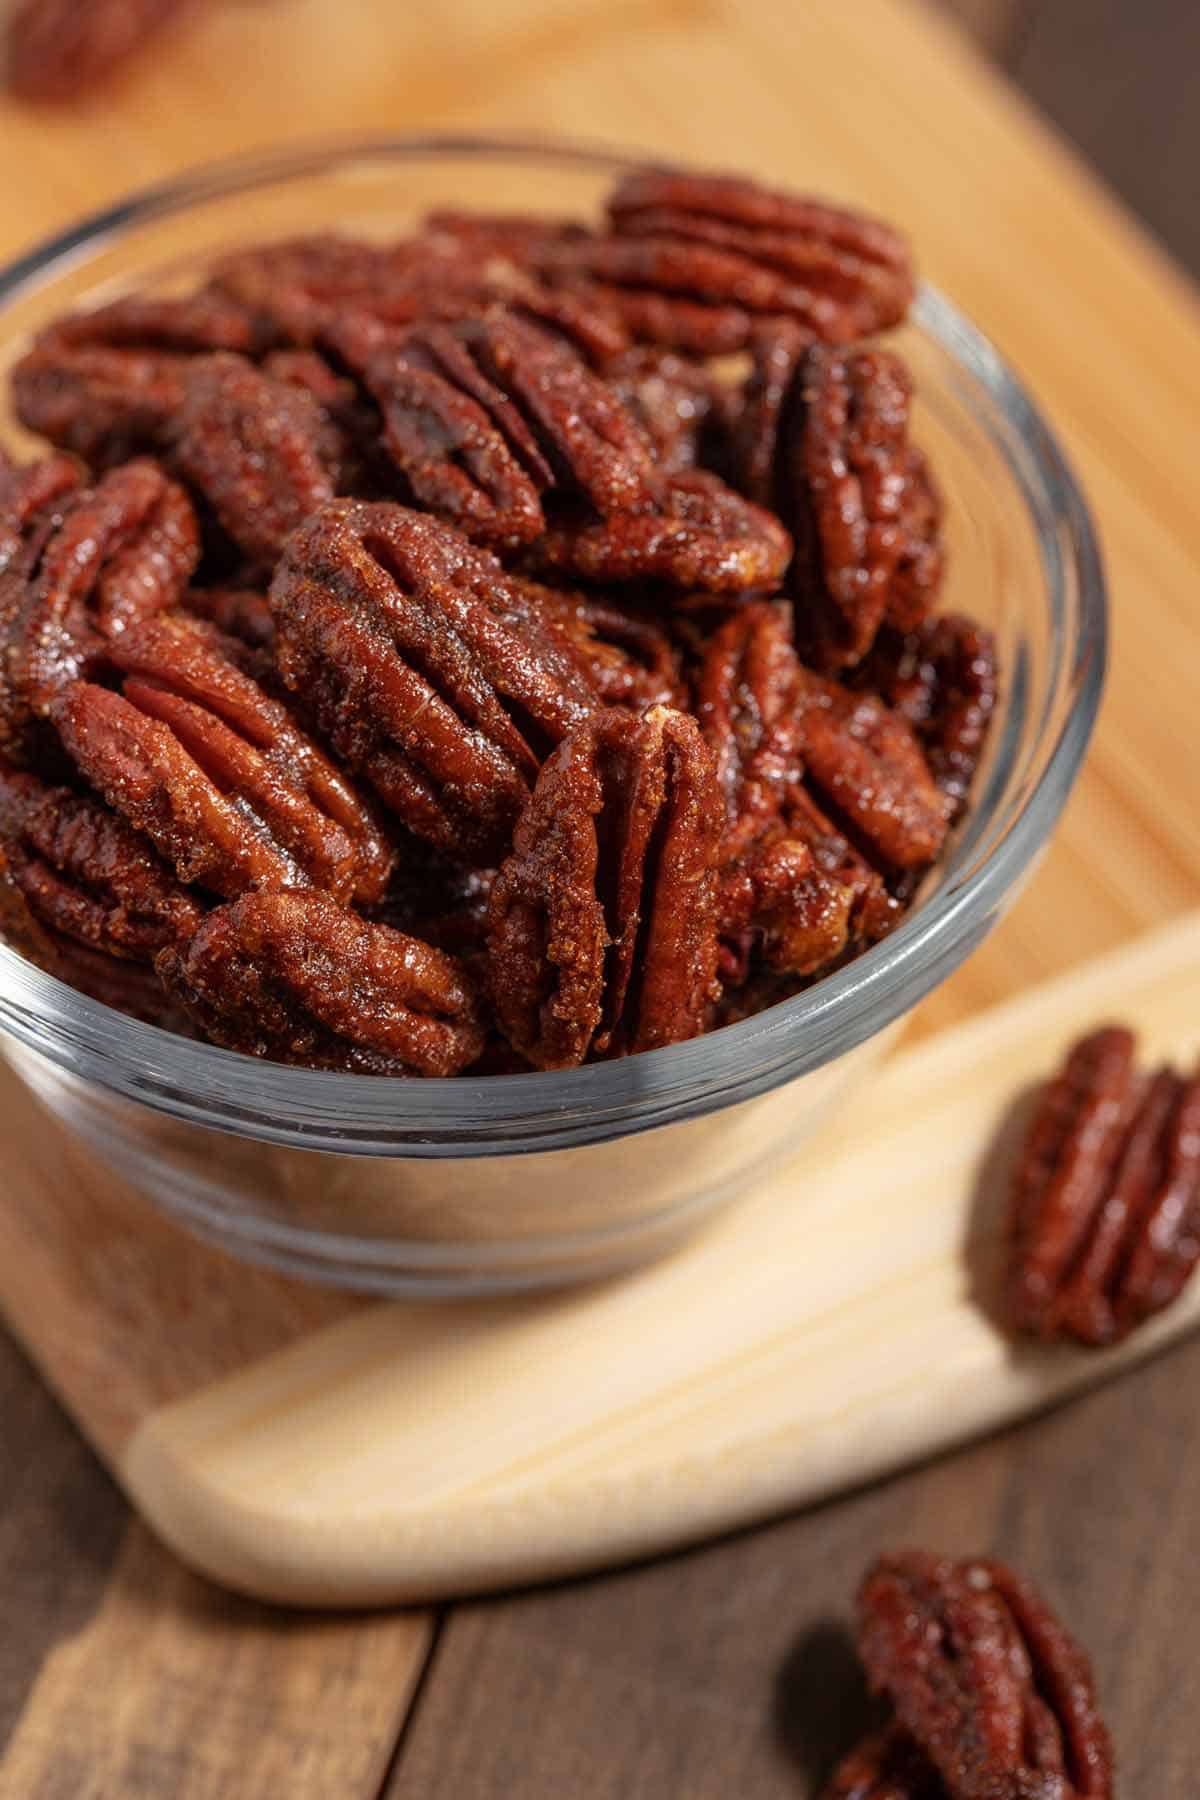 Small bowl of candied Trader Joe's copycat sweet and spicy pecans.